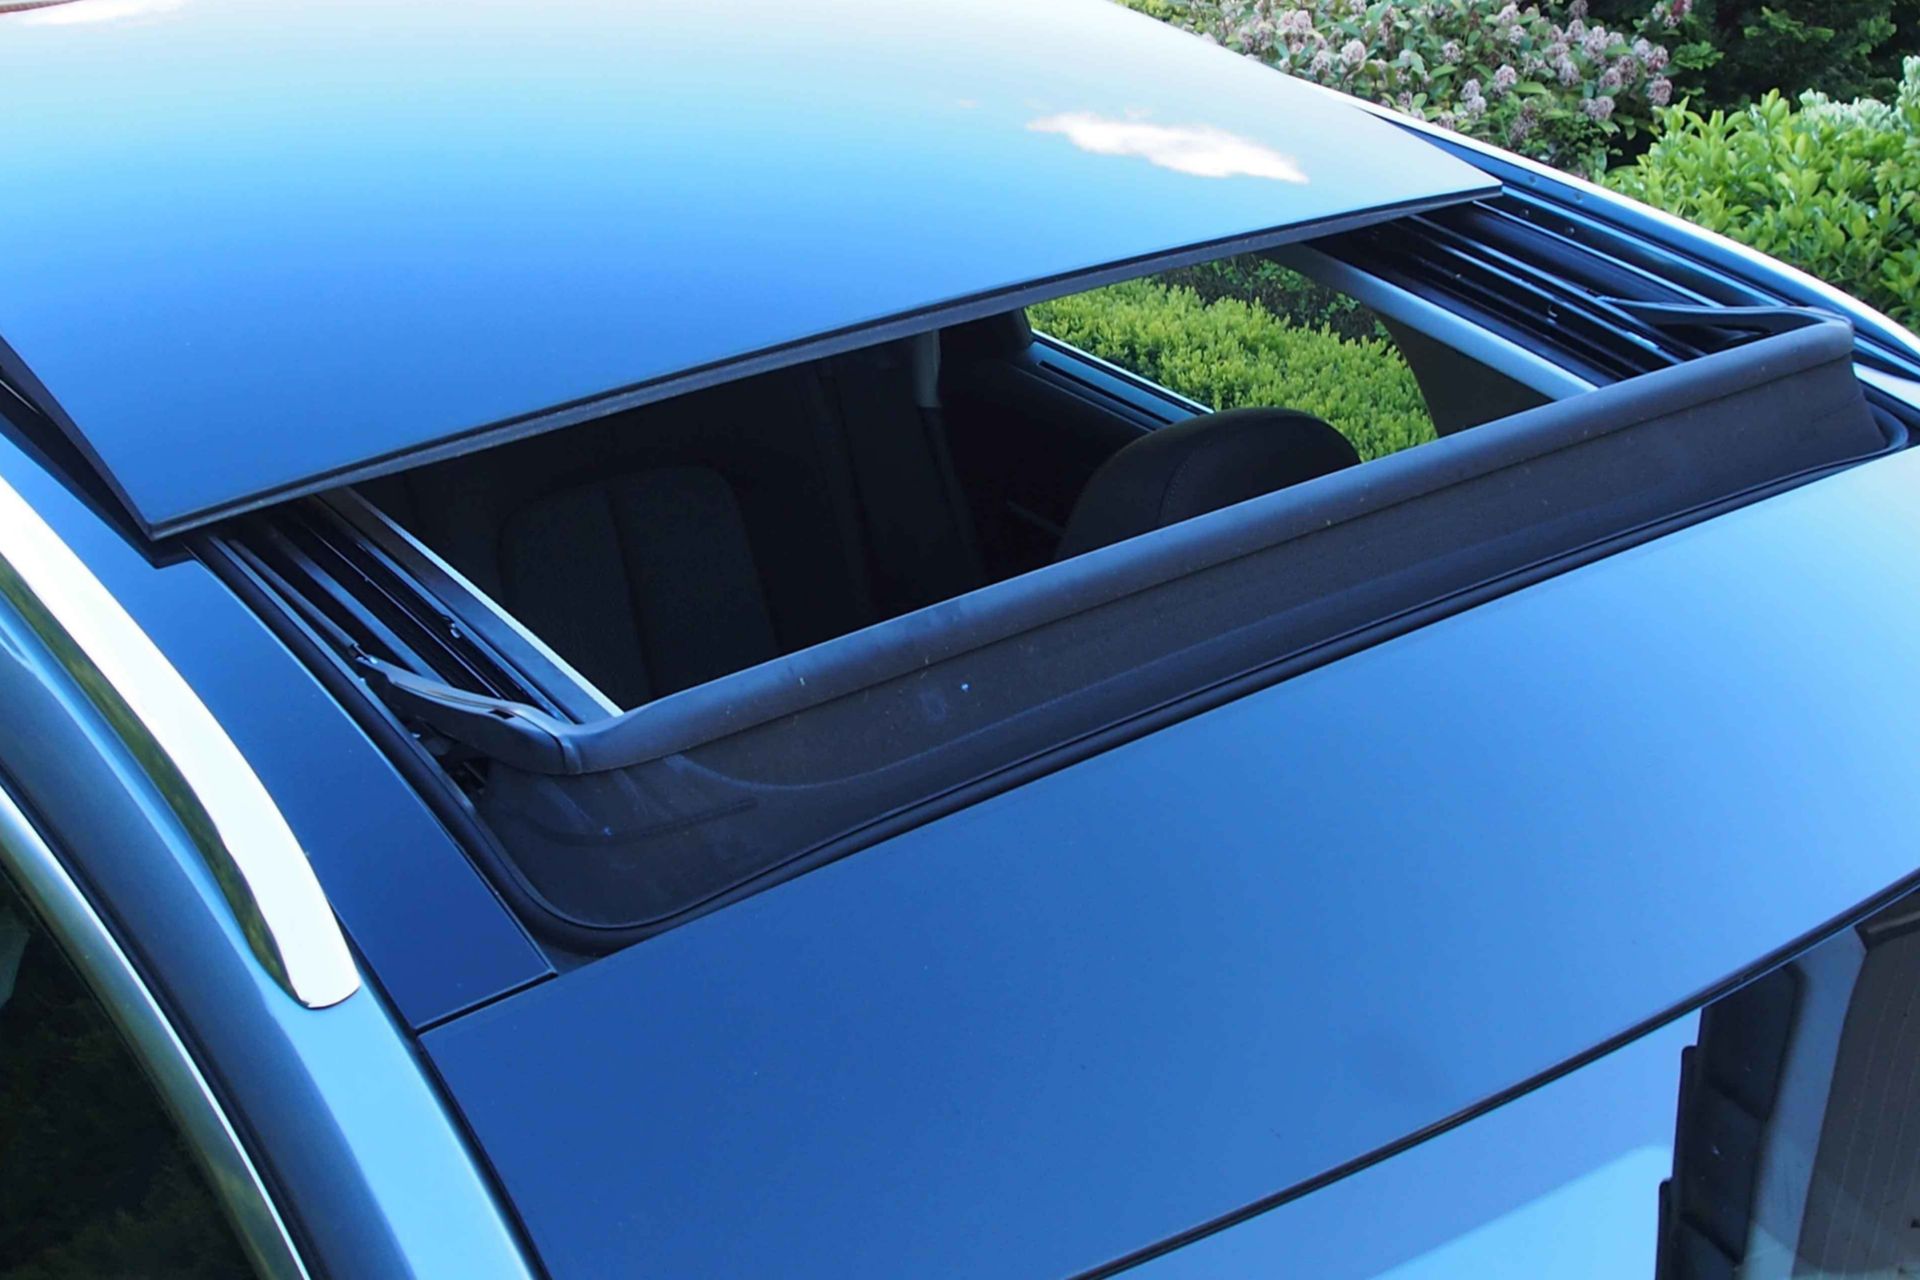 View of vehicle sunroof module bonded with Sikaflex Exterior Adhesive Solutions